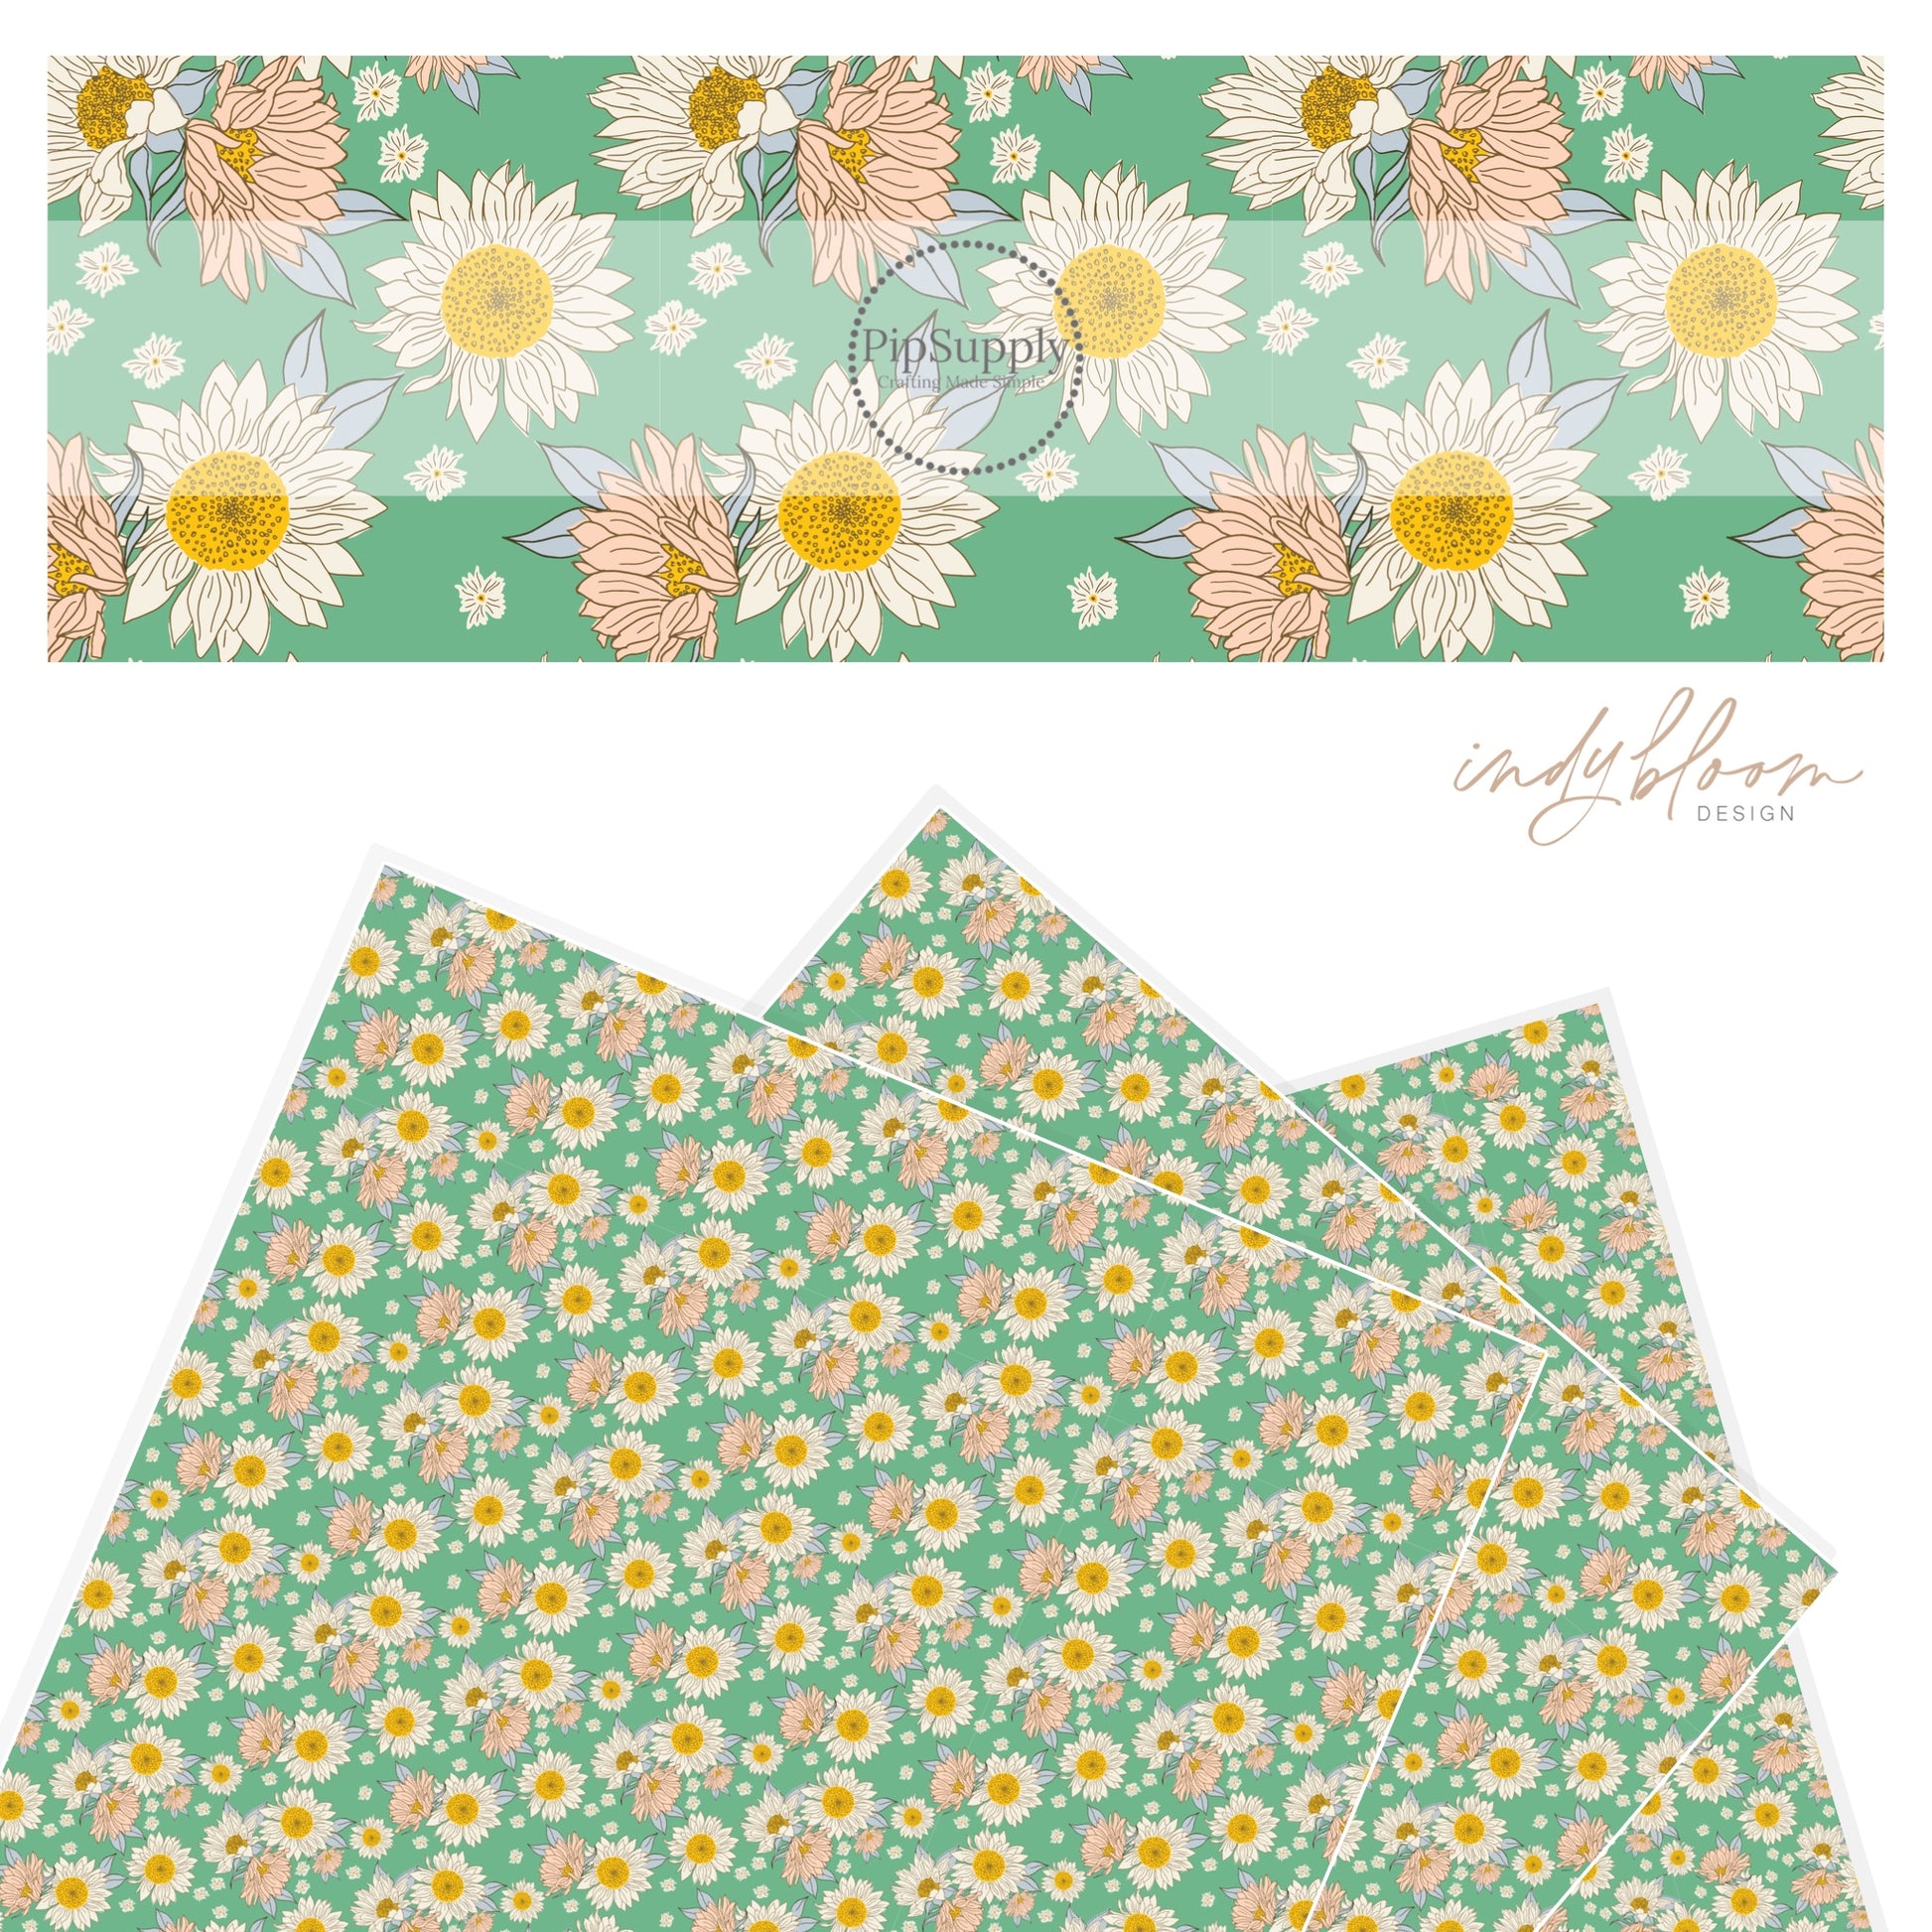 Blush and white sunflowers on green faux leather sheet.